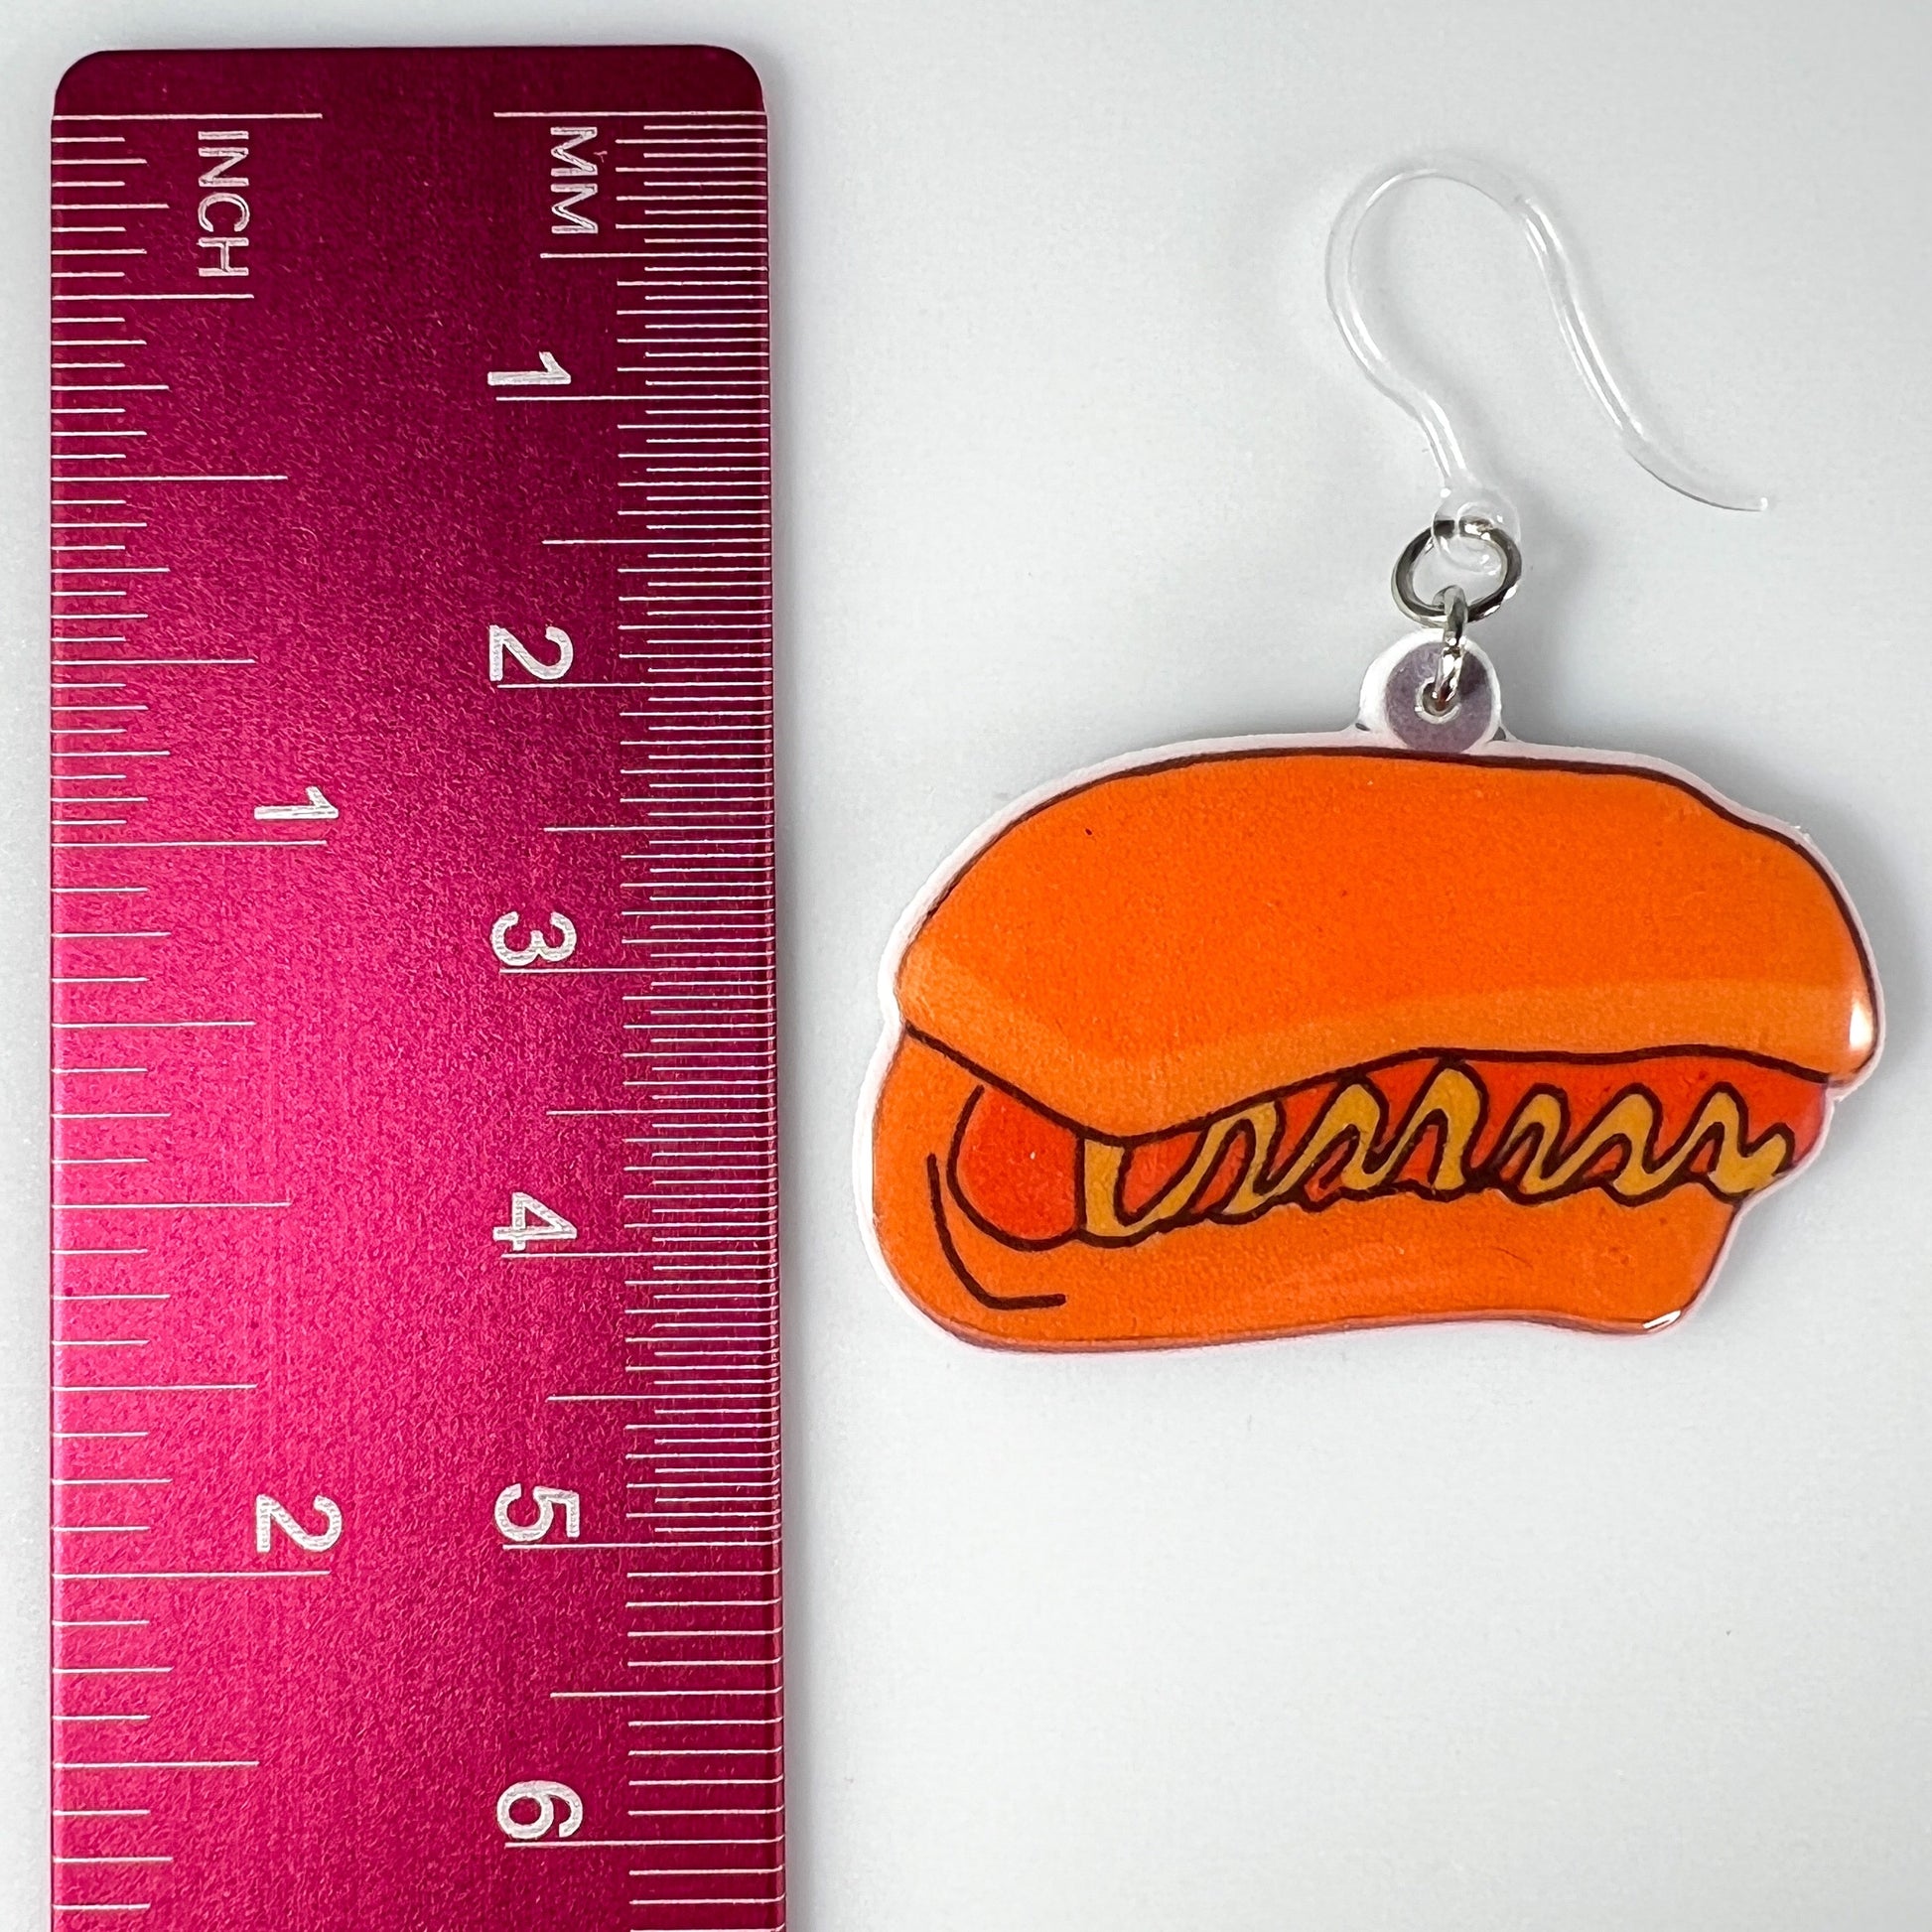 Exaggerated Junk Food Earrings (Dangles) - hot dog - size